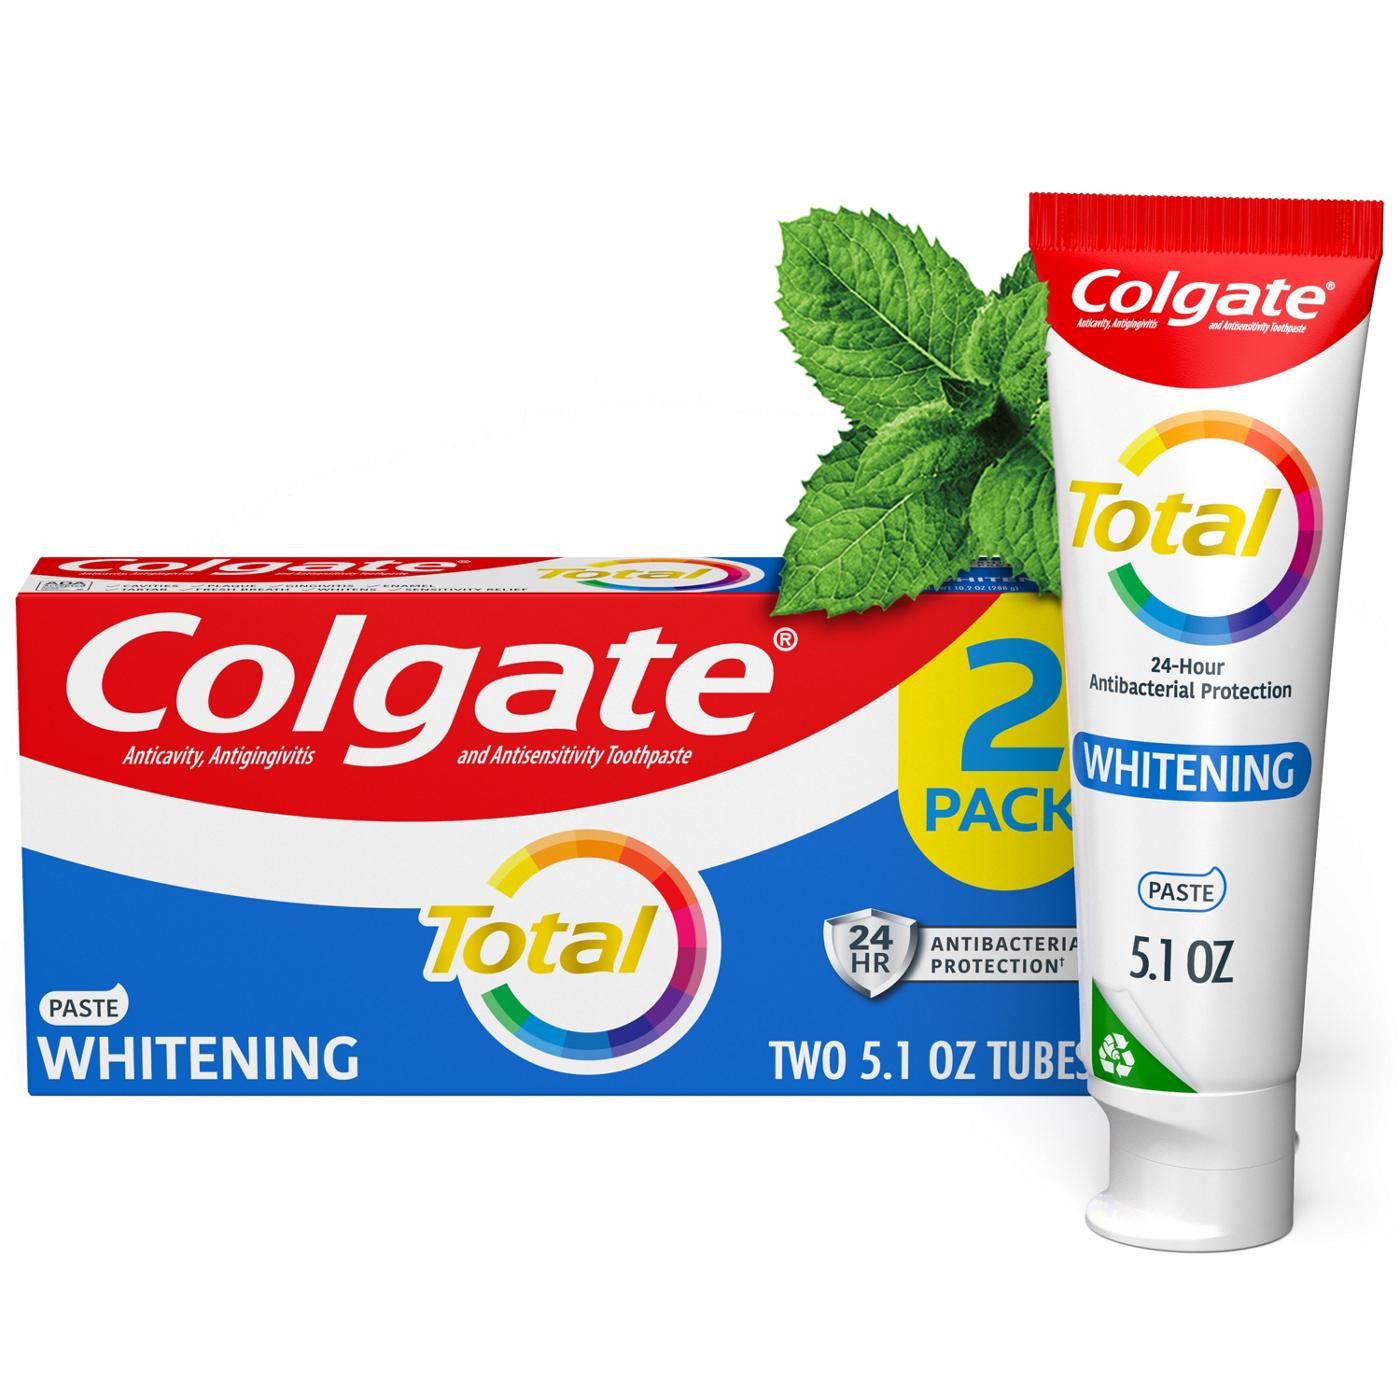 Colgate Total Whitening Toothpaste, 2 Pk; image 12 of 18